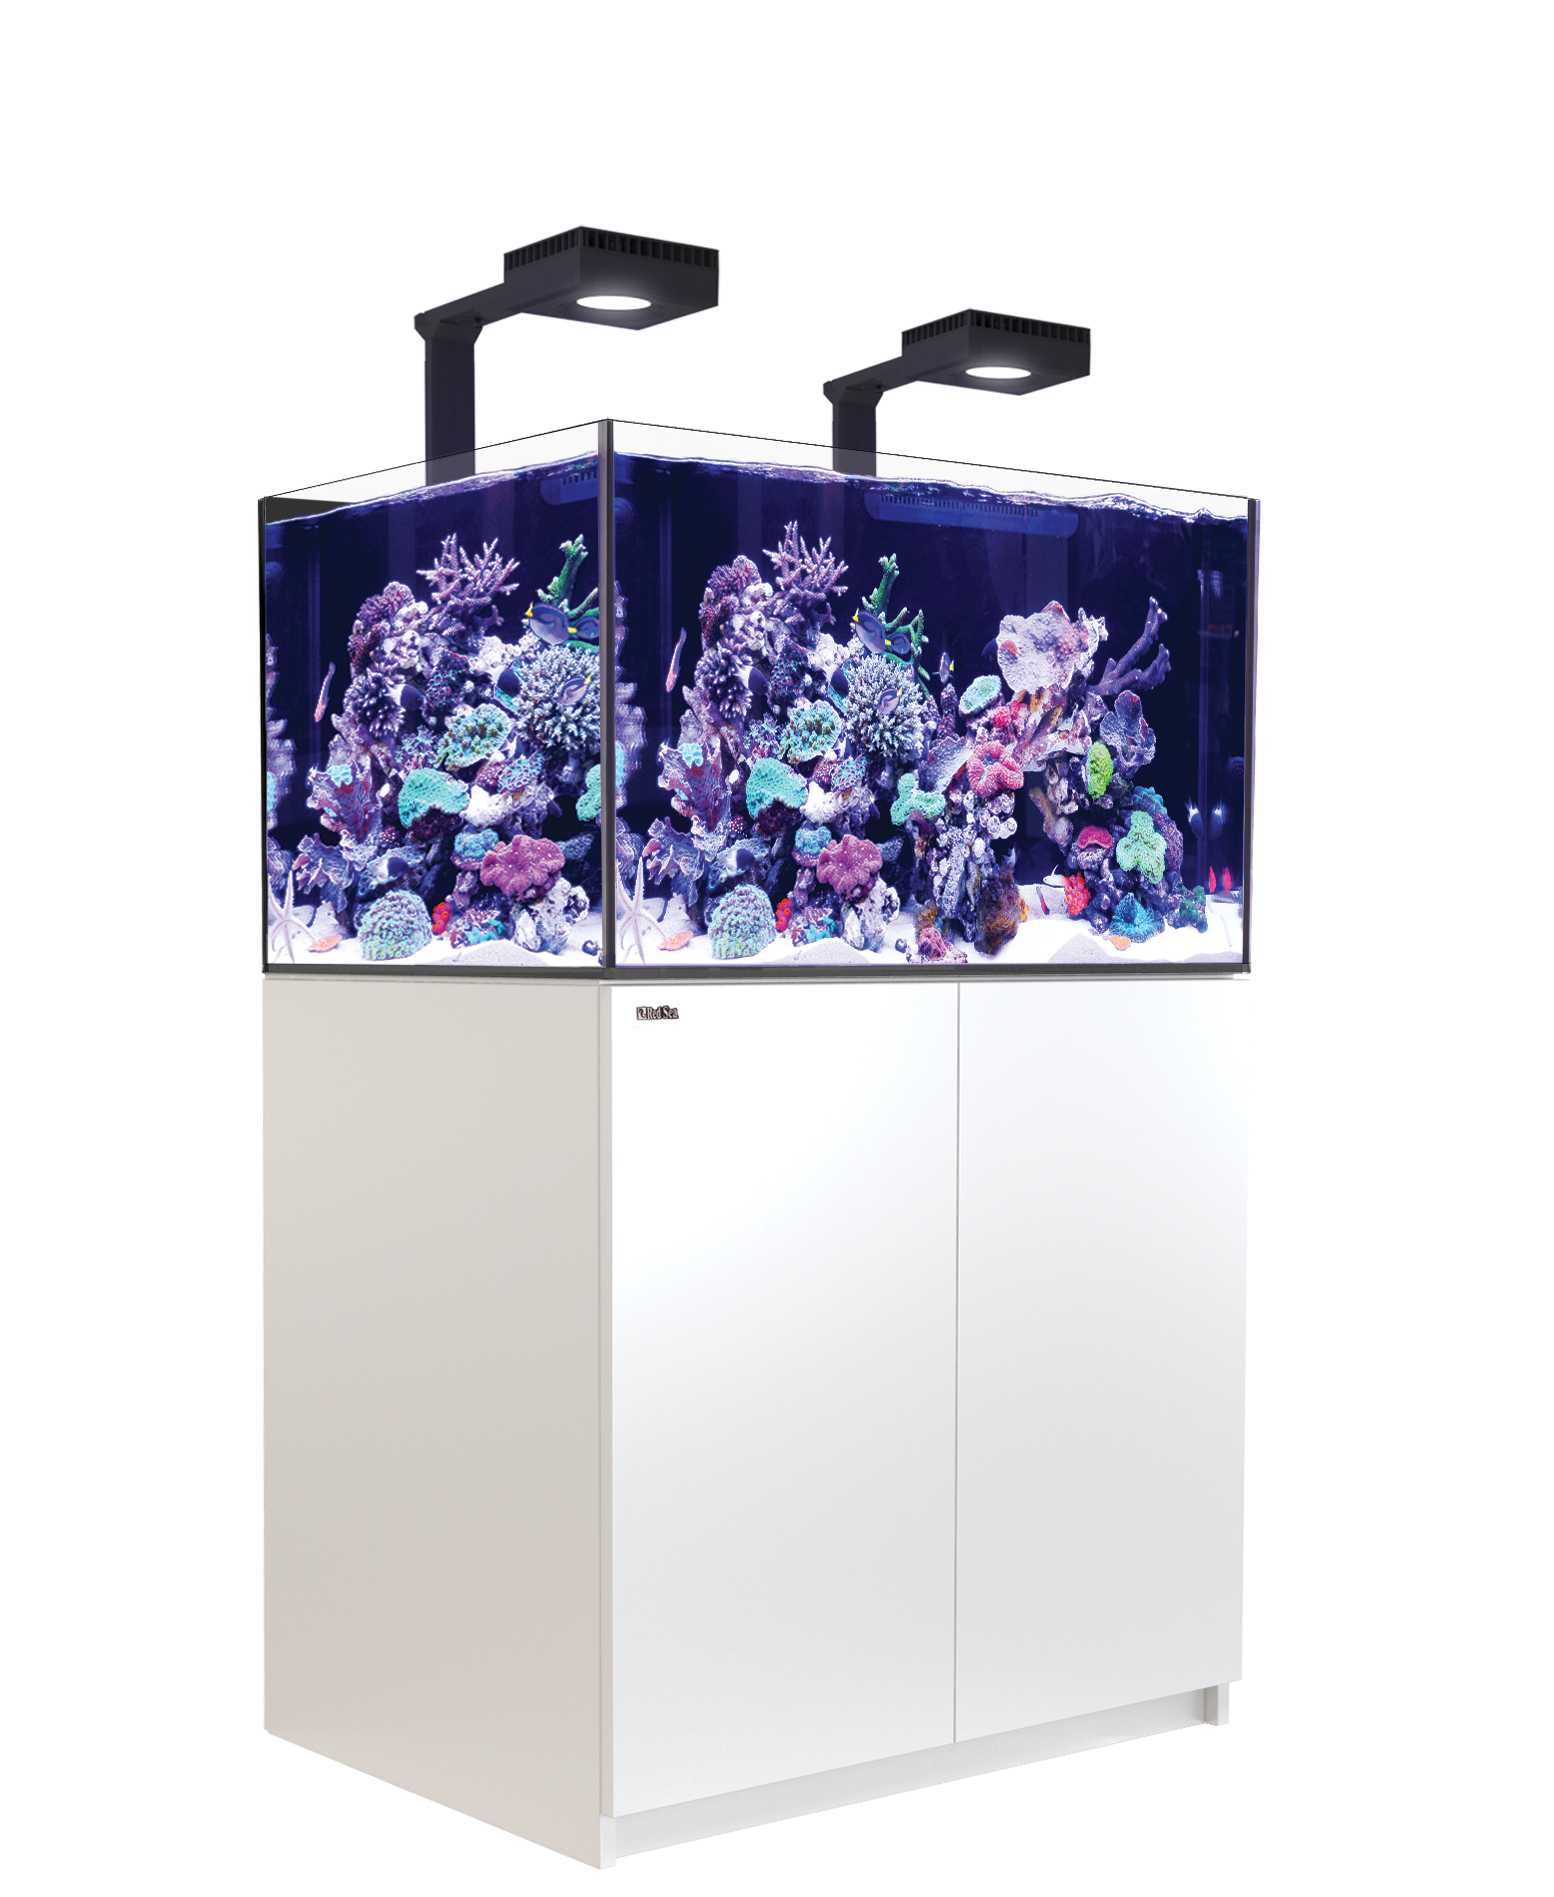 Red Sea REEFER XL300 G2+ Deluxe System - White (incl. 2x RL90 & Mount Arms)